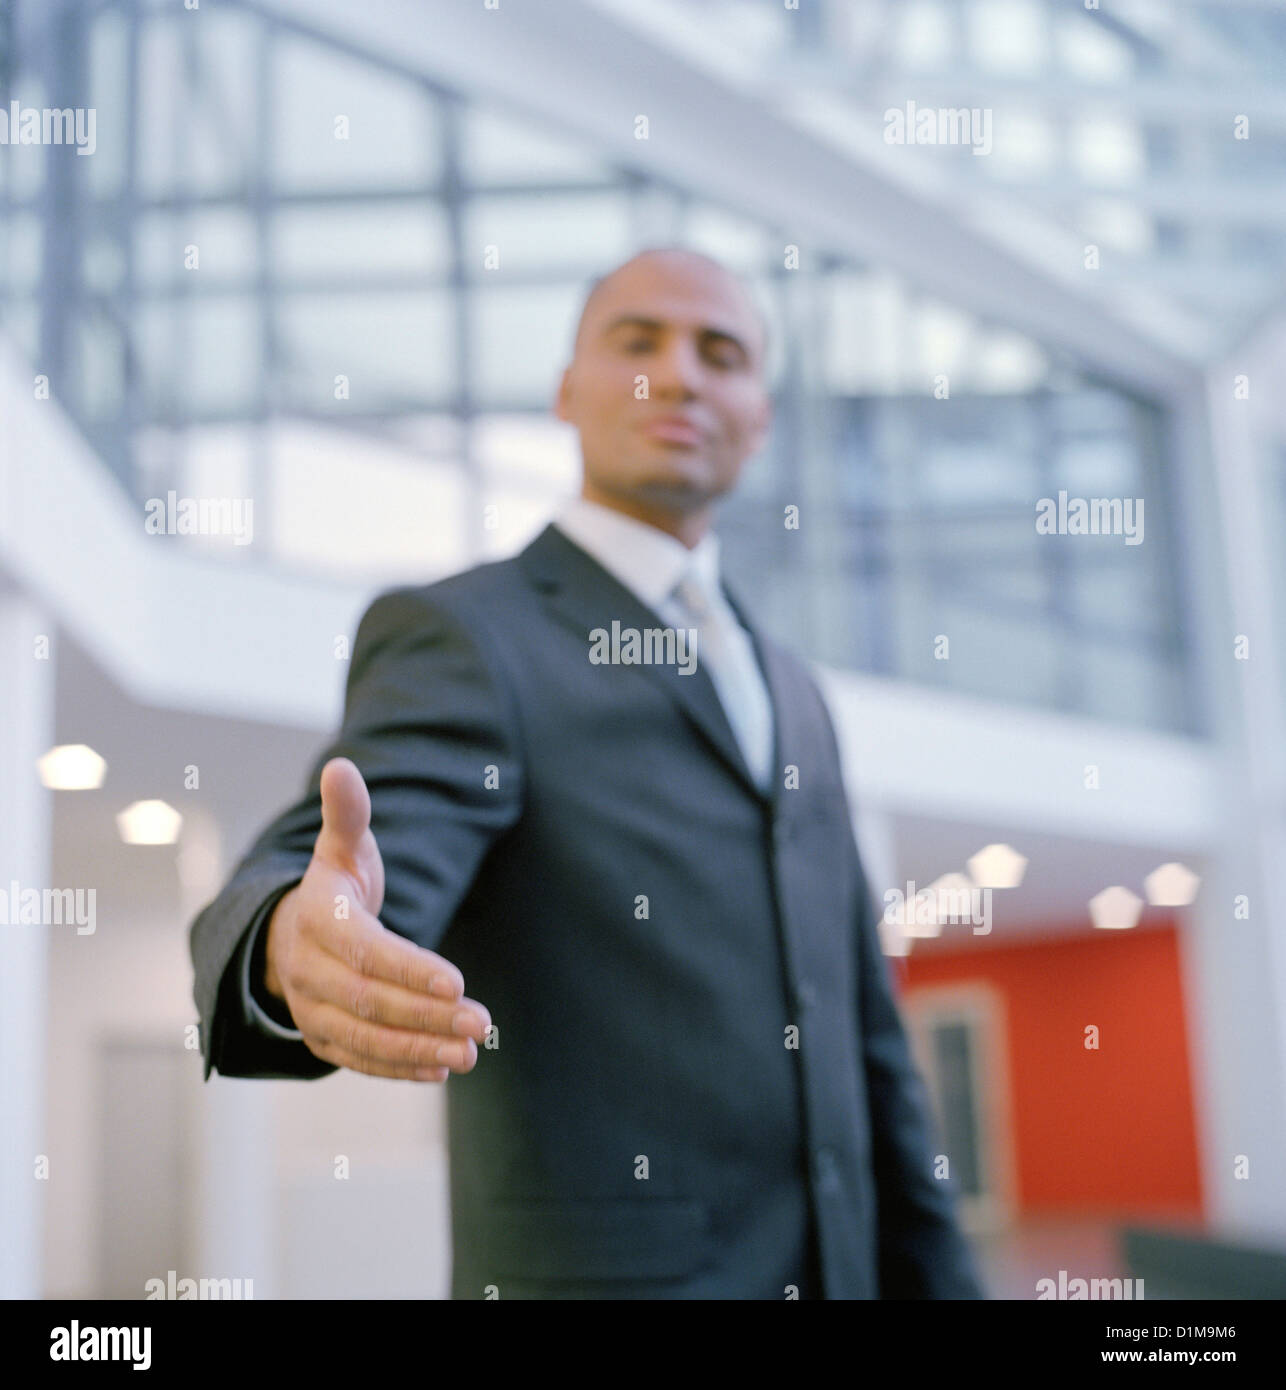 Charismatic businessman holding out his hand License free except ads and billboards Stock Photo